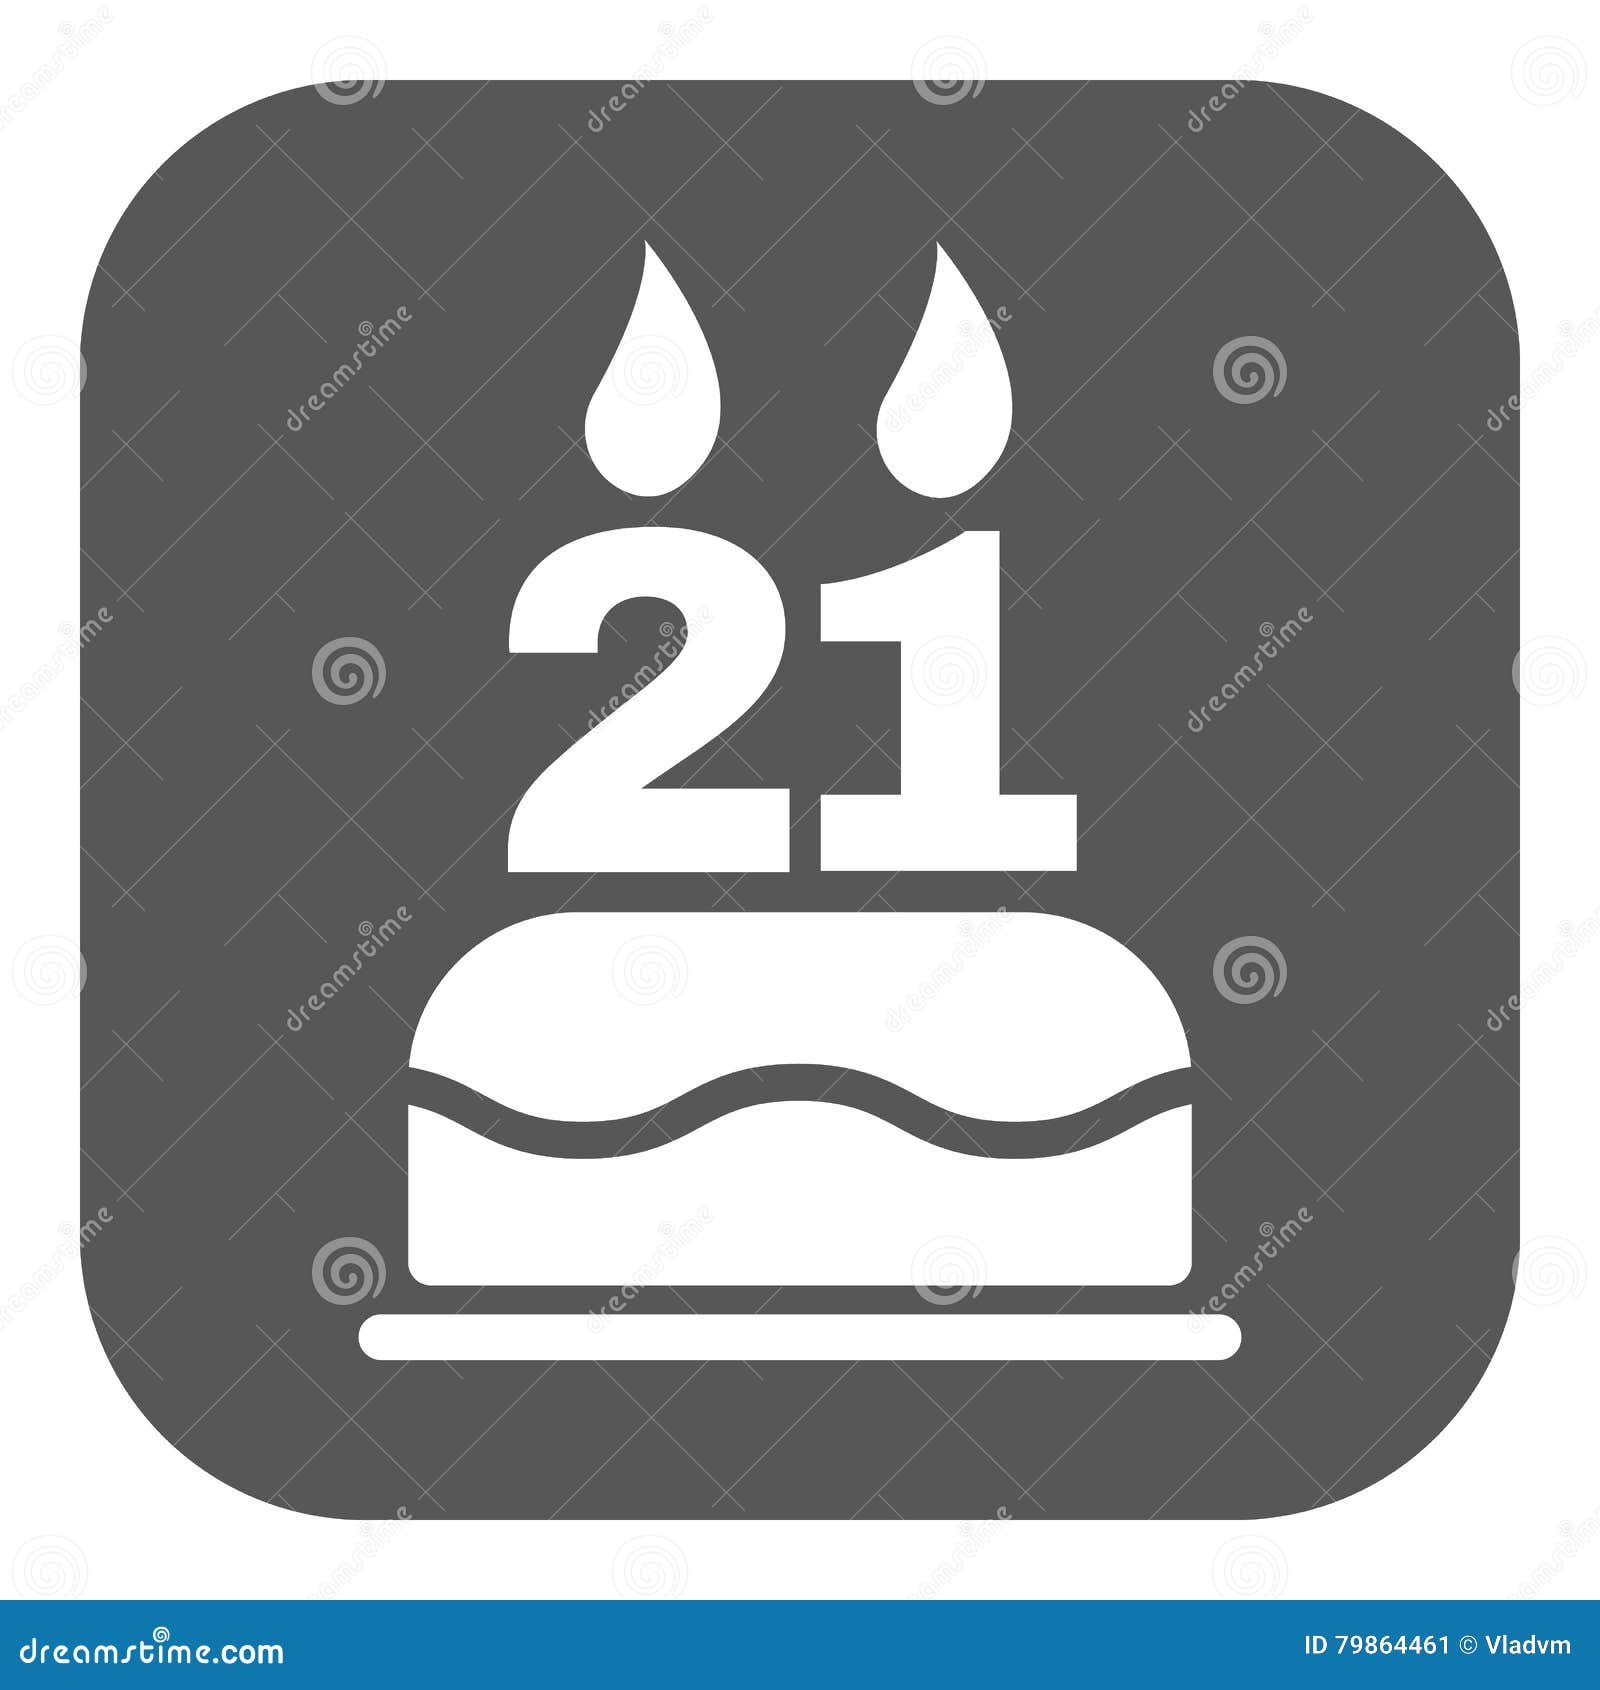 Birthday Cake Line Art Stock Photos and Images  123RF